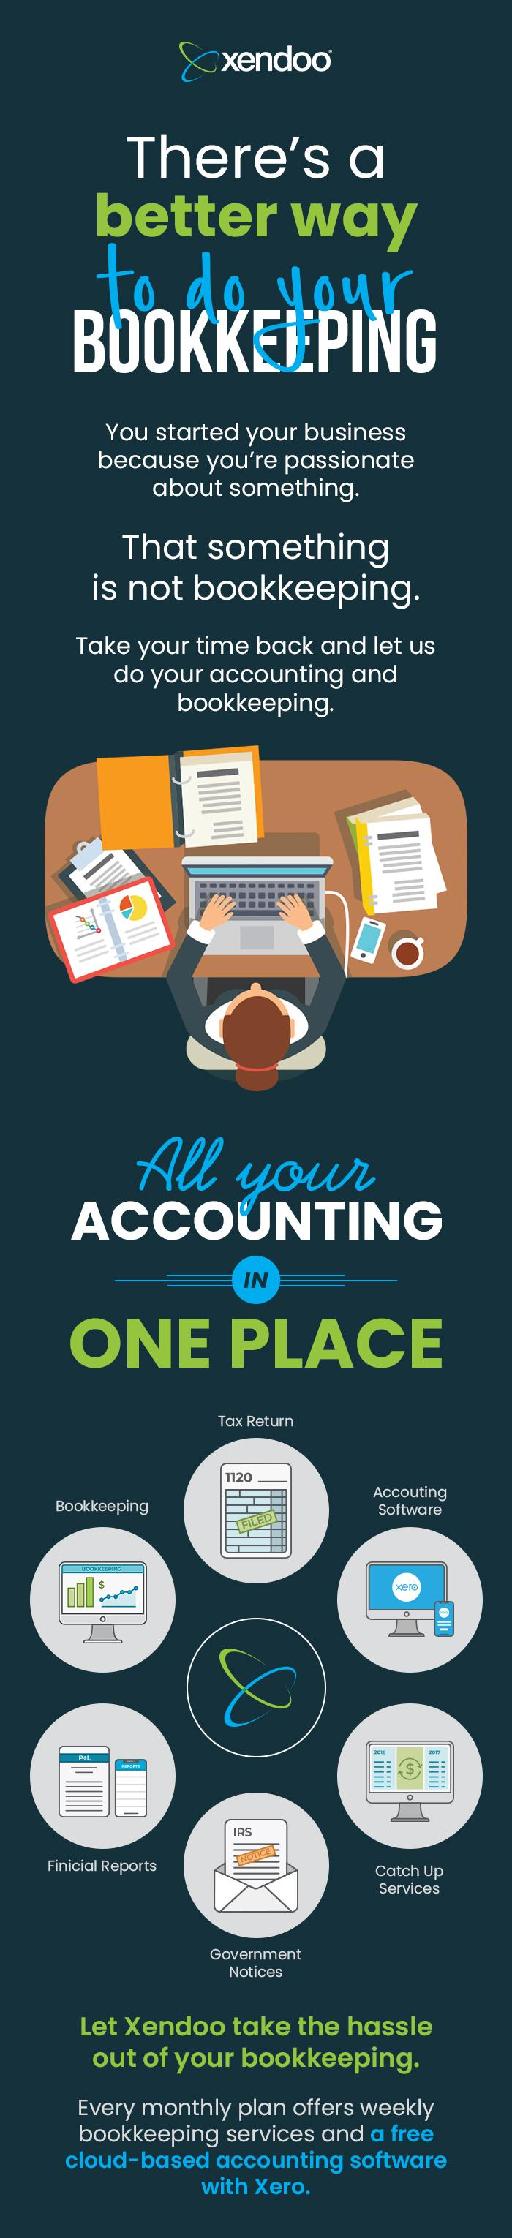 Trusted Source for Accounting & Bookkeeping Services